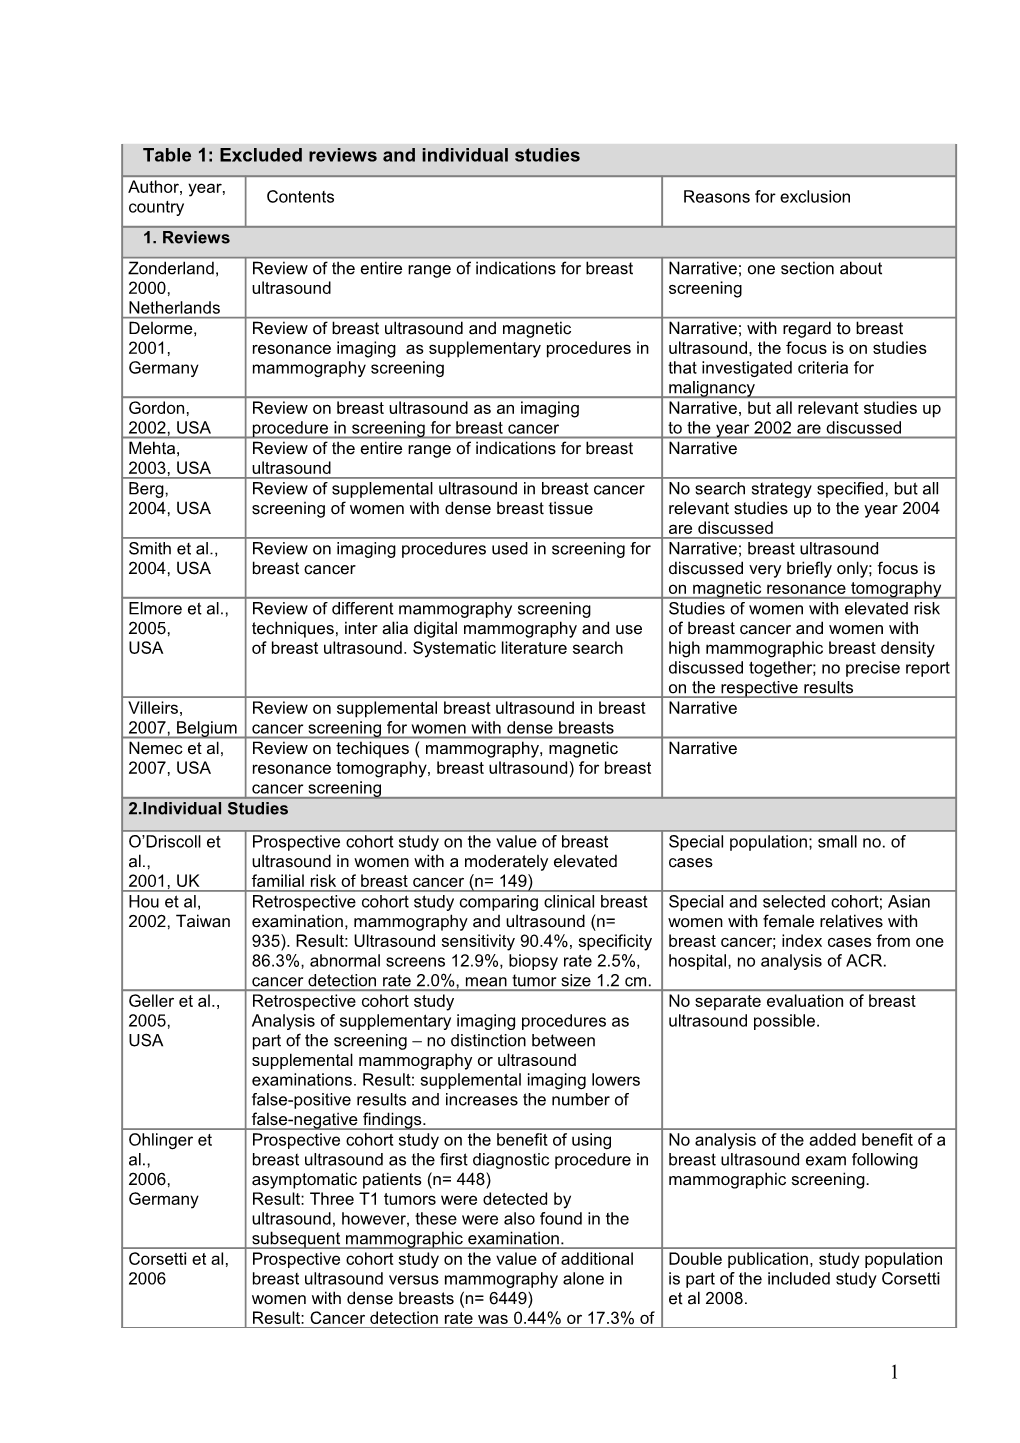 Table 1: Levels of Evidence According to the Oxford Classification 2001 1